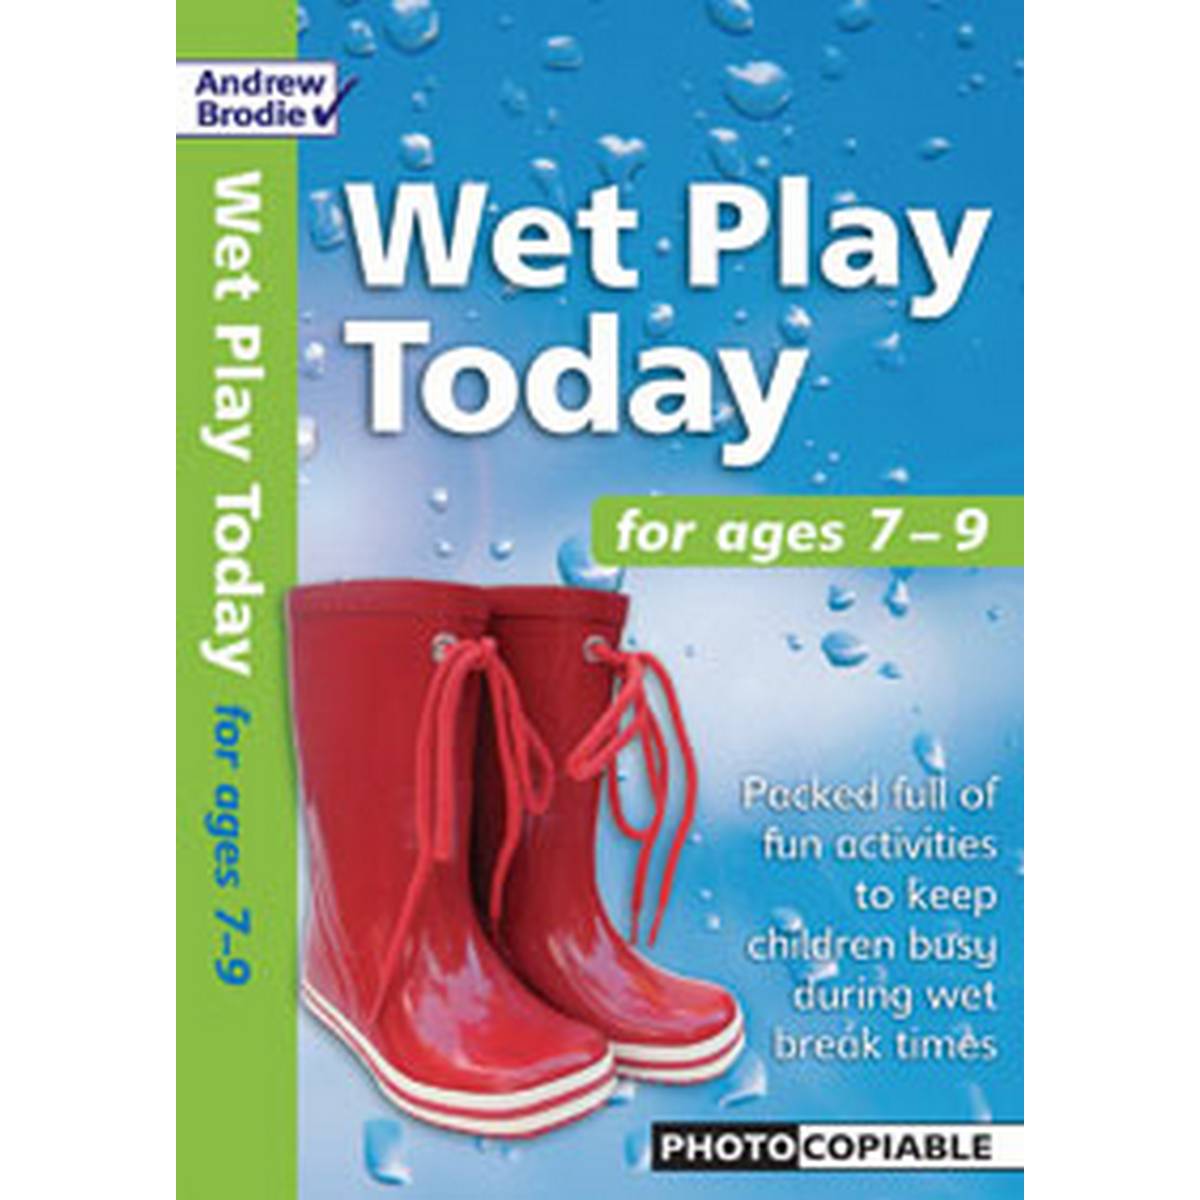 Wet Play Today for ages 7-9